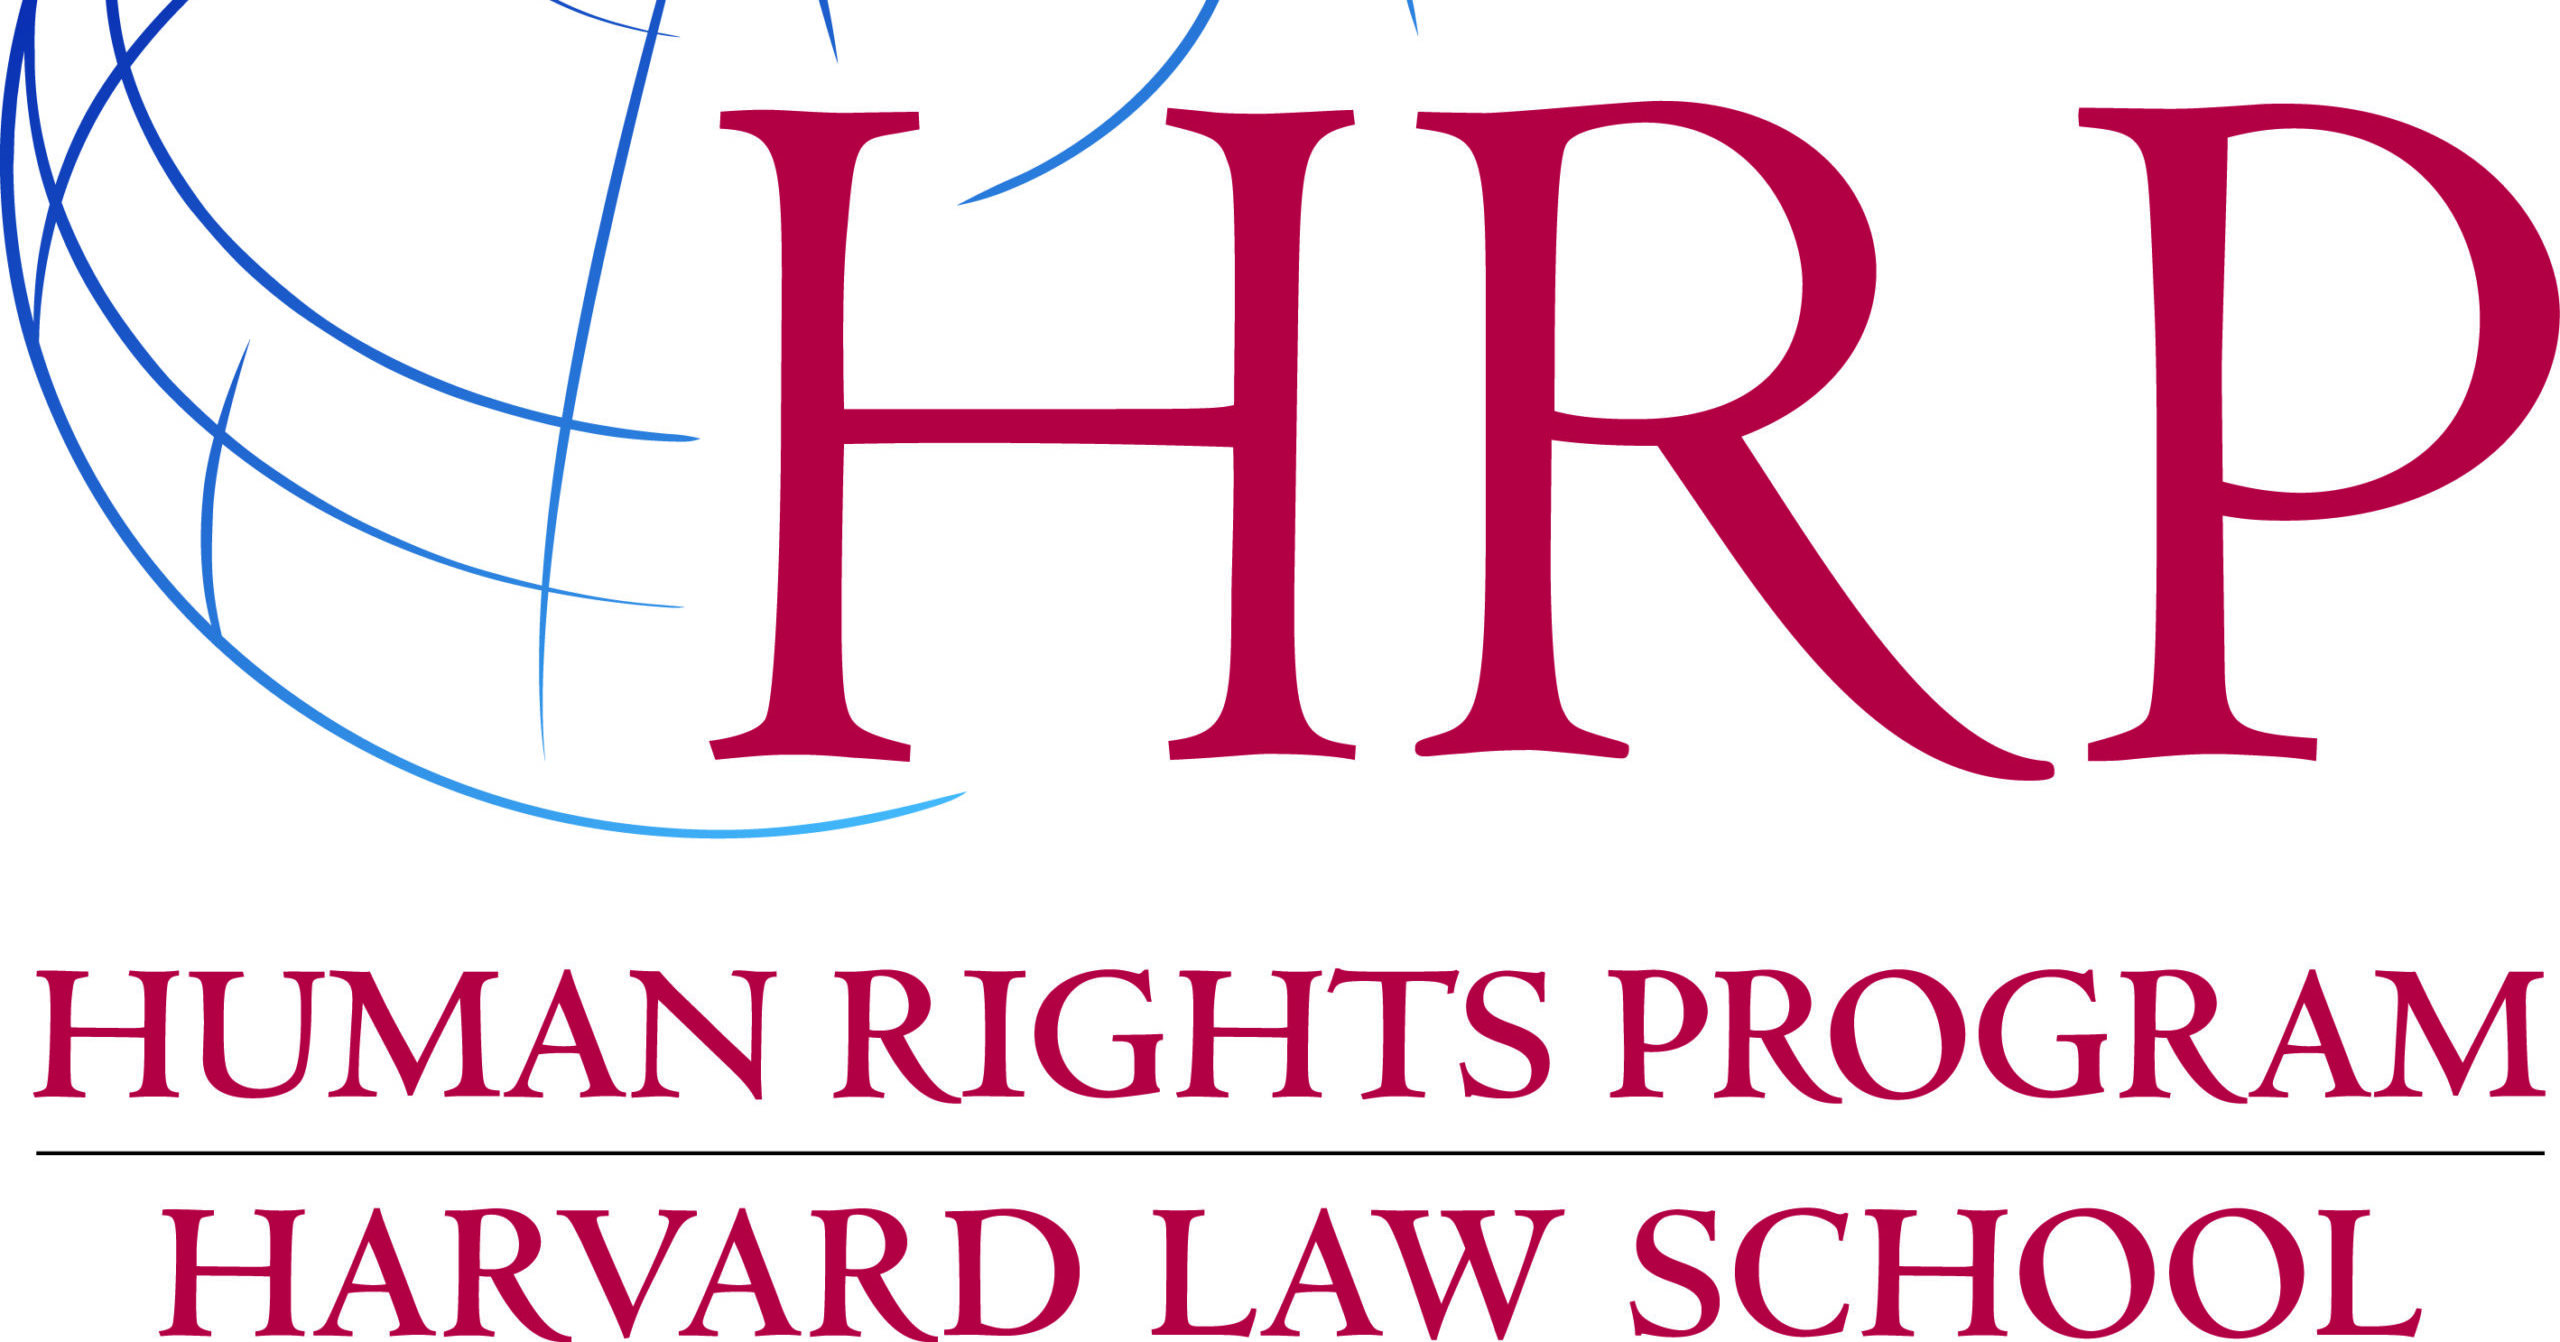 Deny rights. Harvard Law School. Inter-American Commission on Human rights.